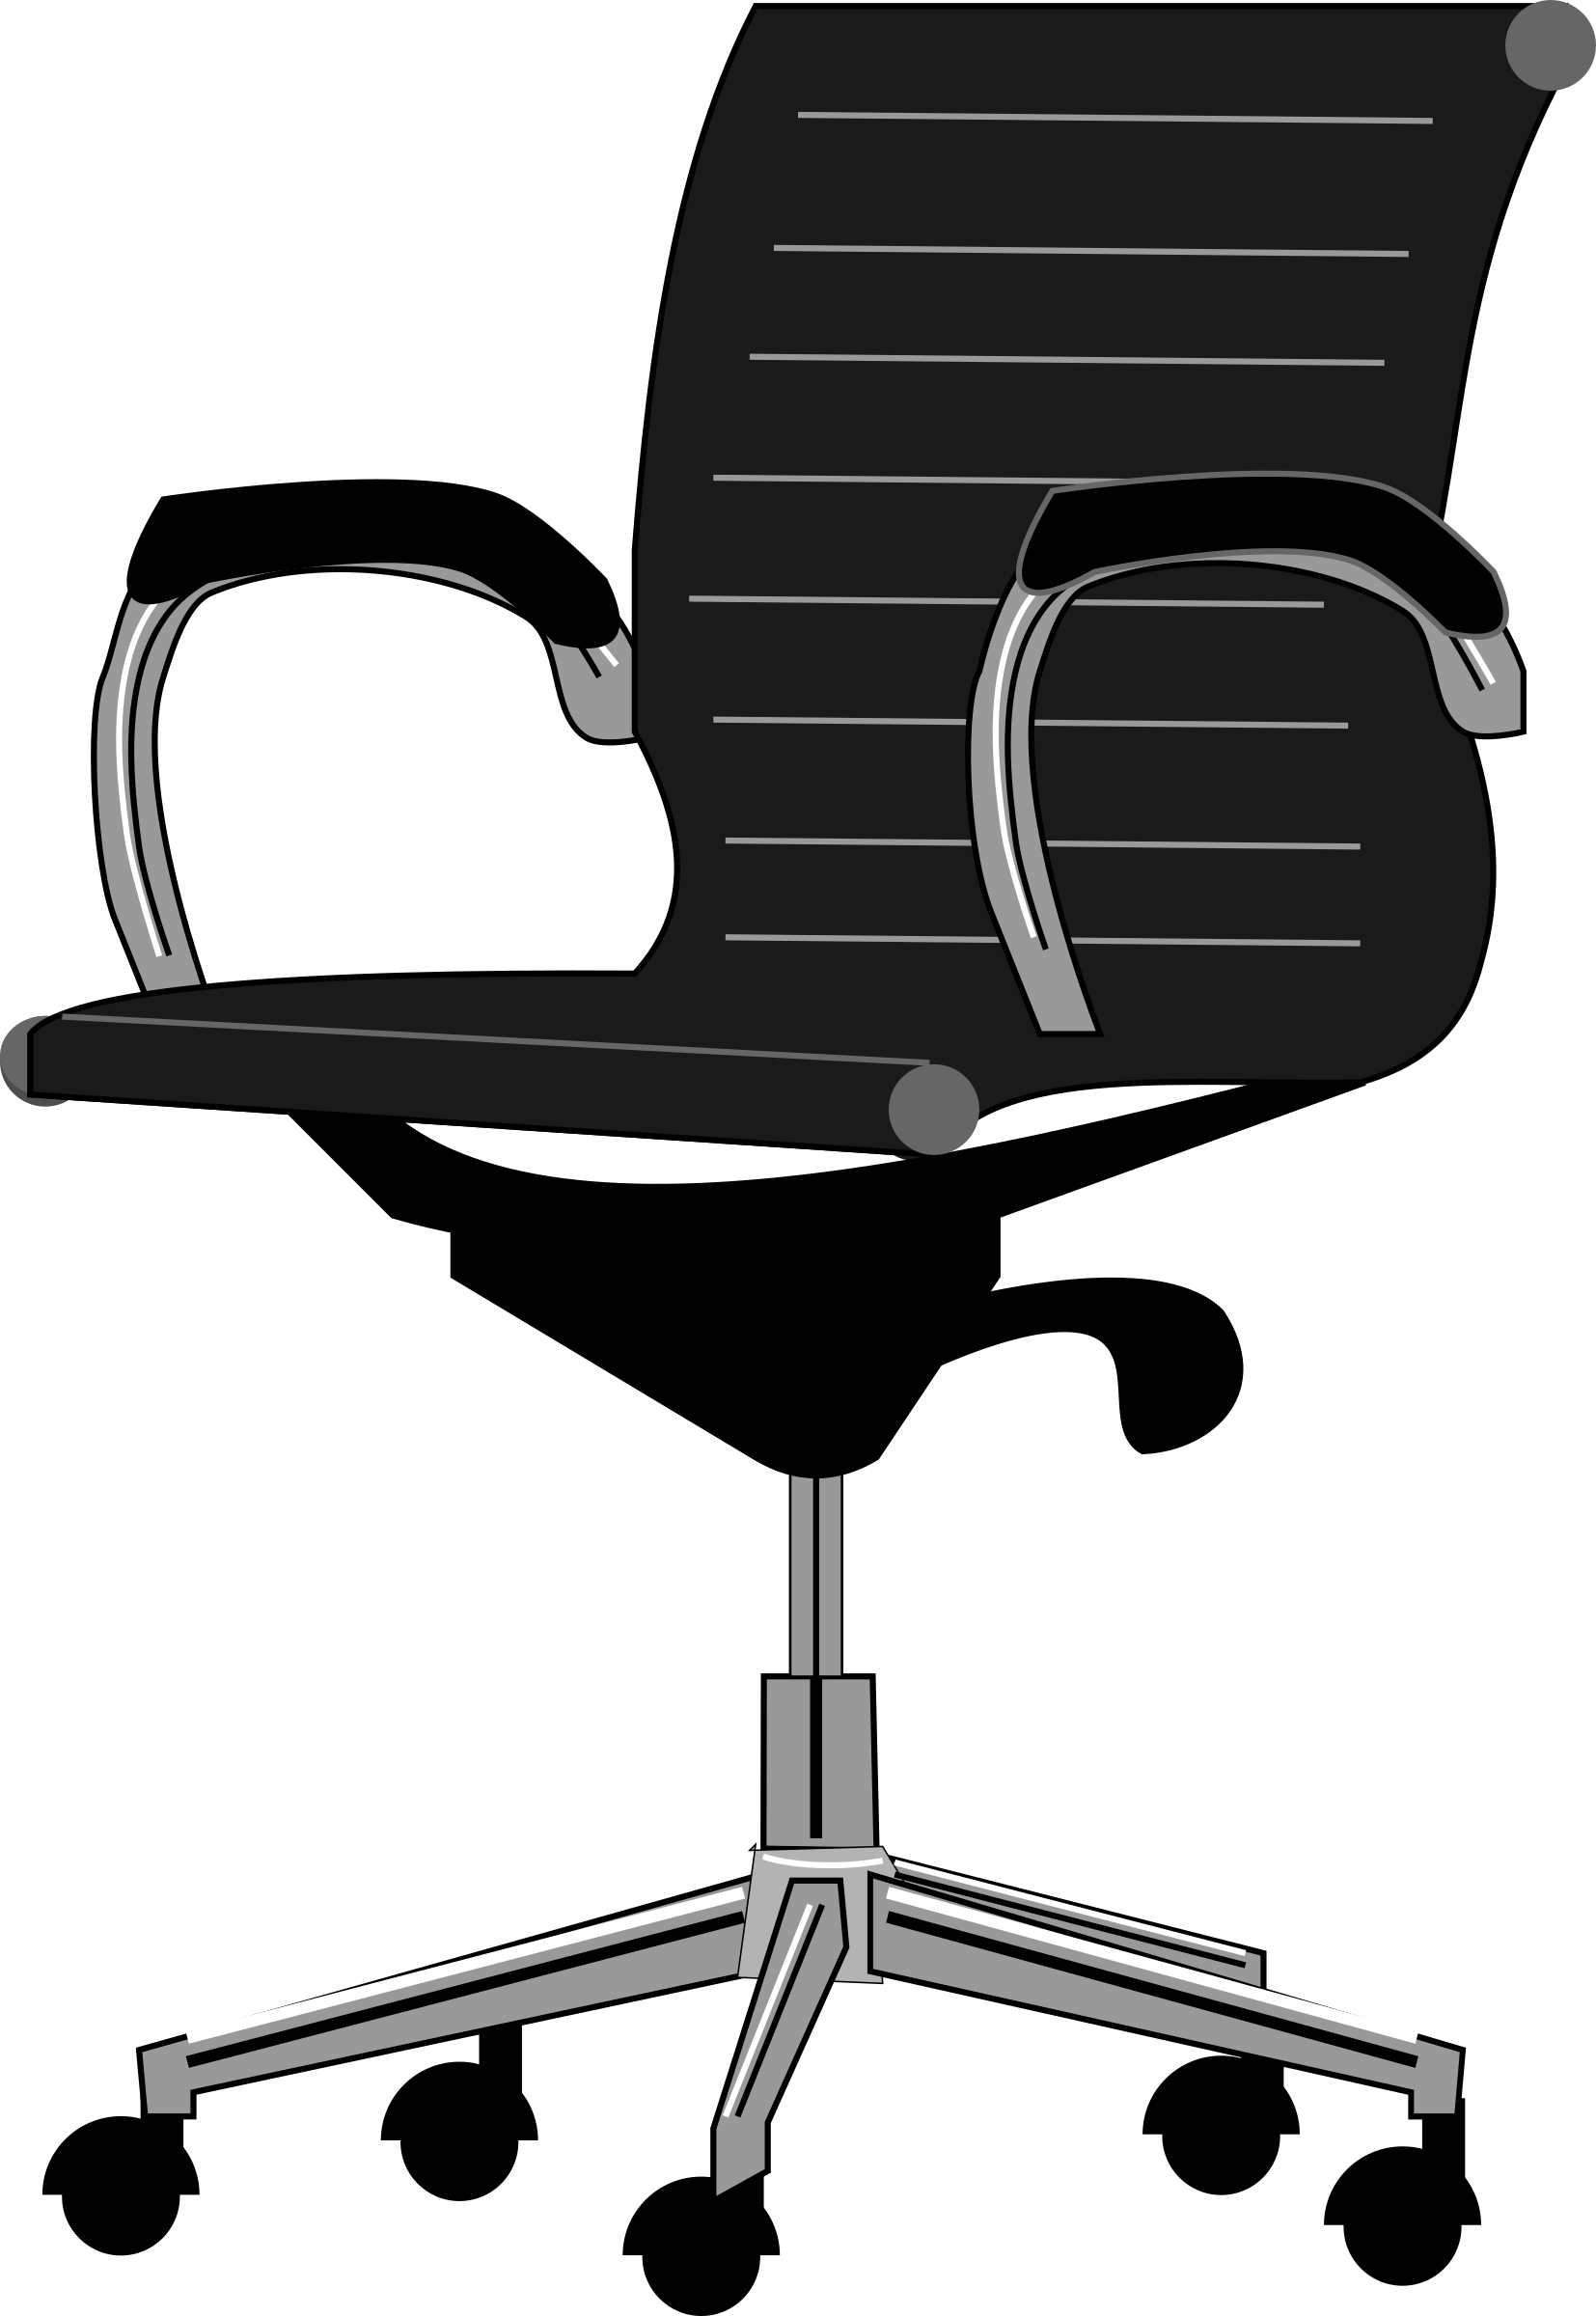 Office Chair Top View Clipart